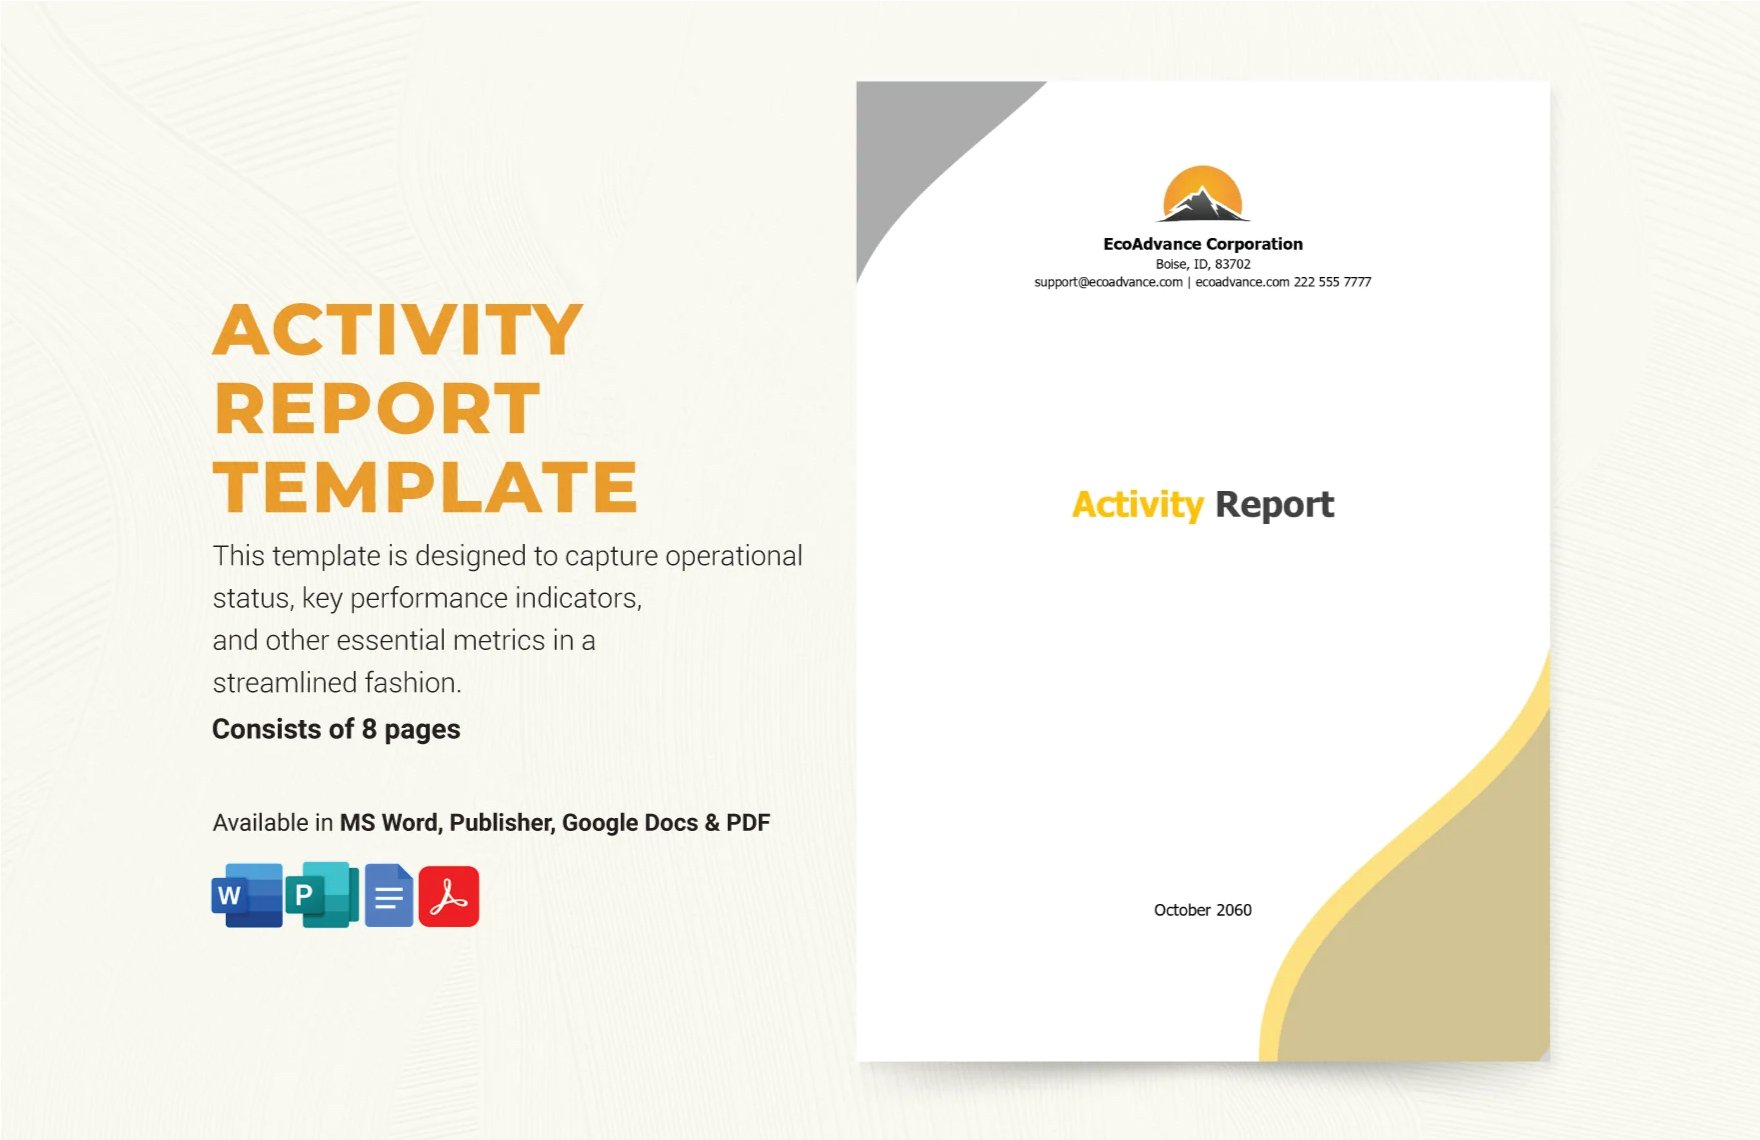 Free Activity Report Template in Word, Google Docs, PDF, Publisher